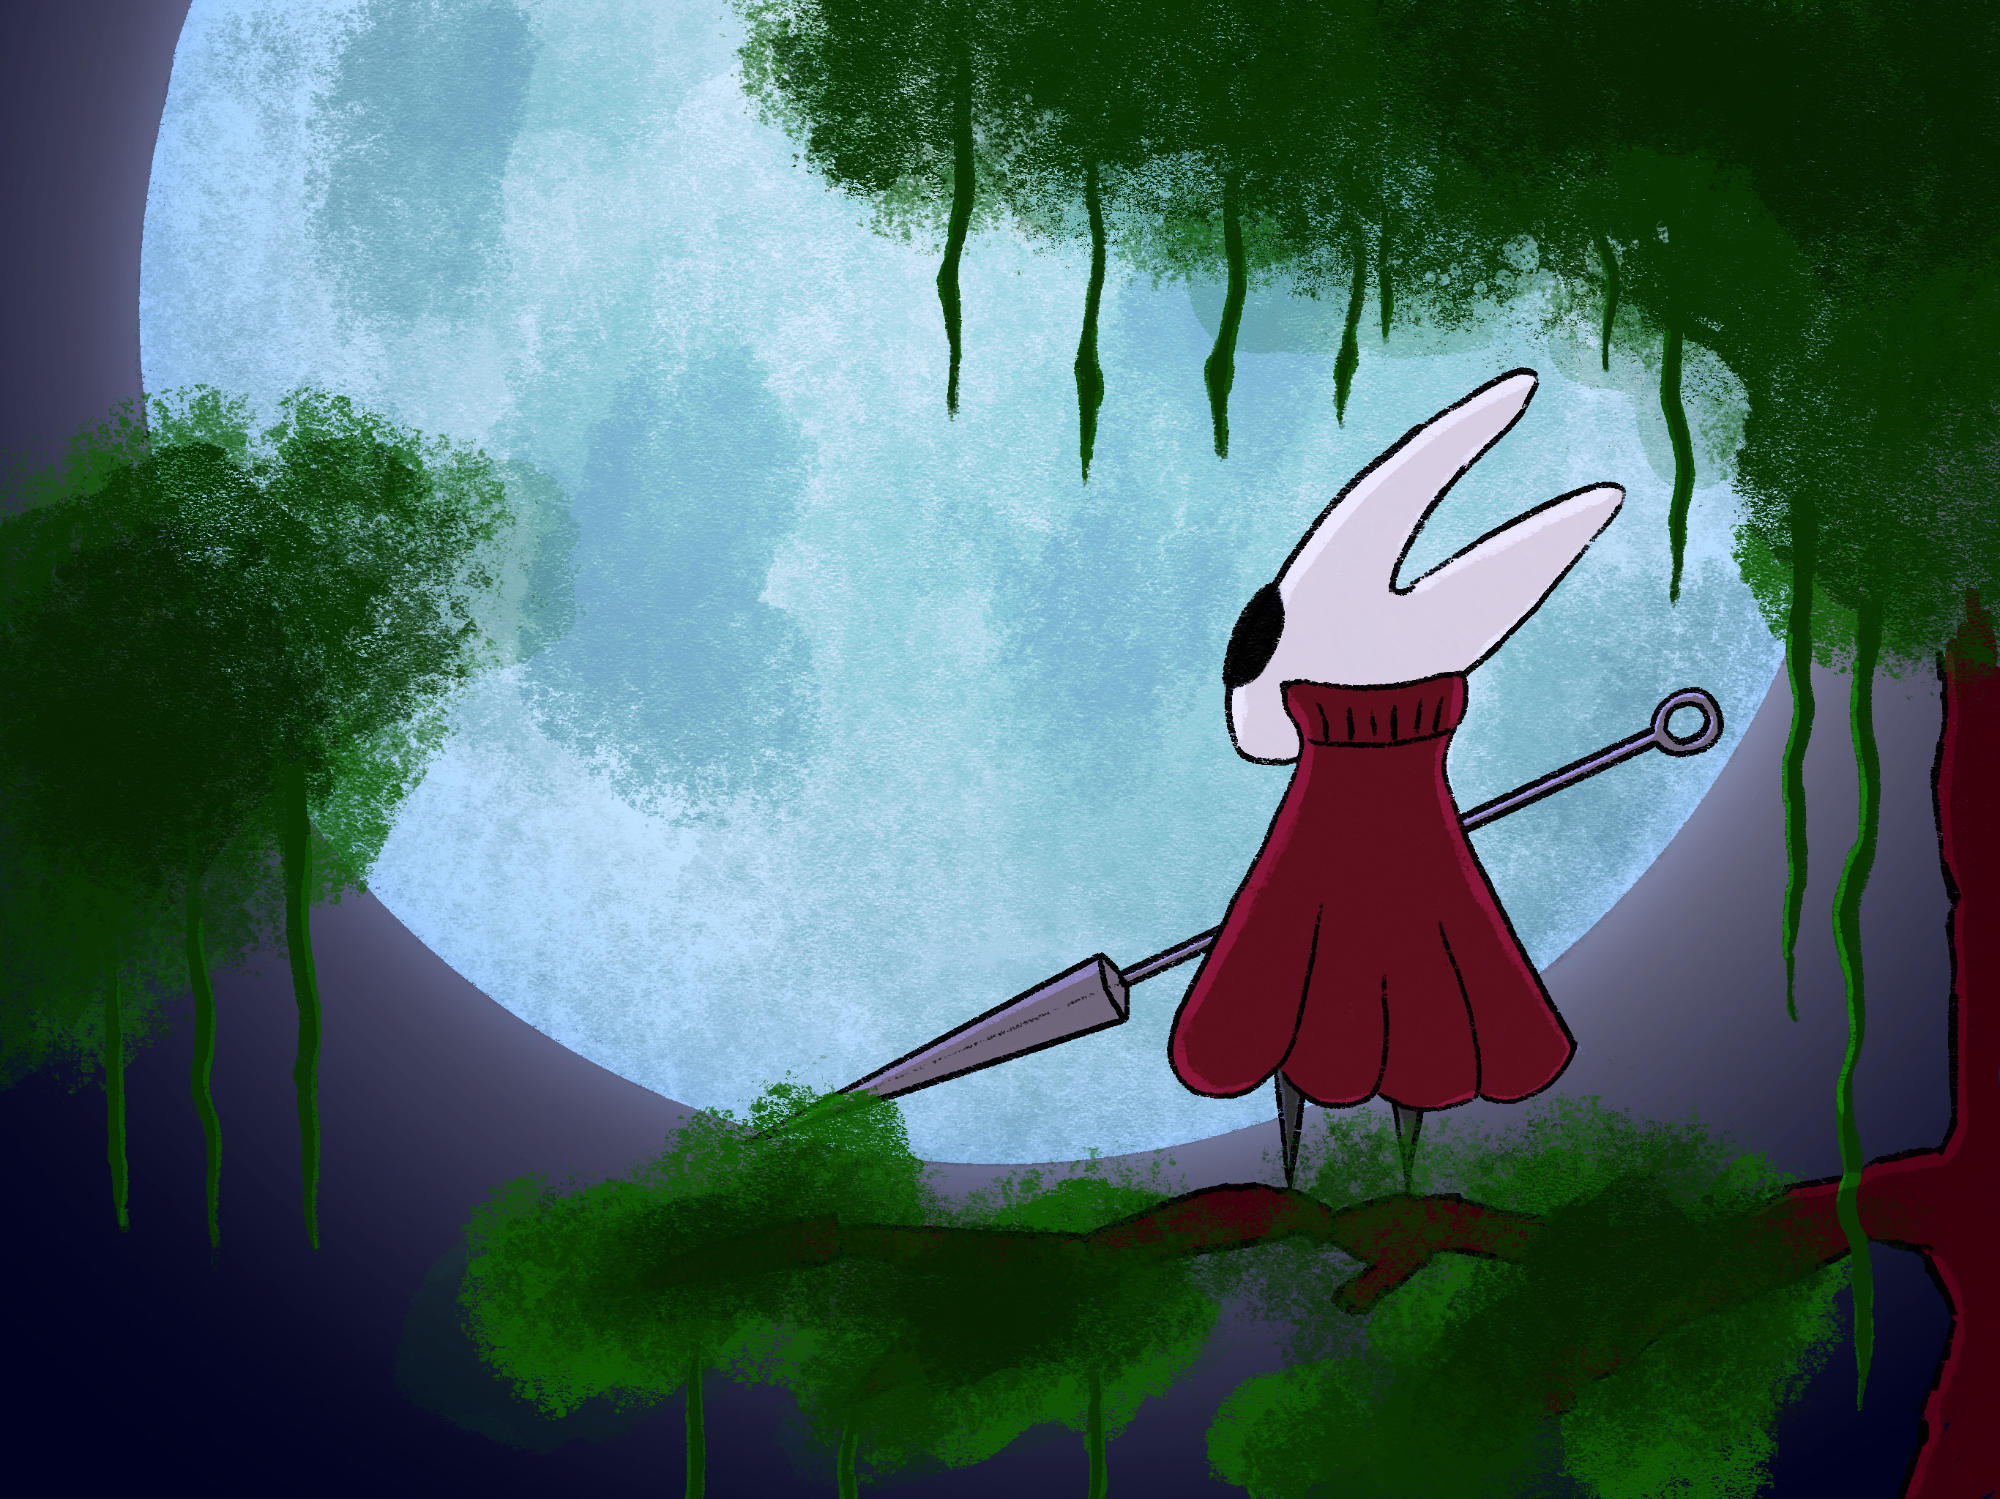 Drawing of hornet from Hollow Knight staying on a tree branch in front of the full moon